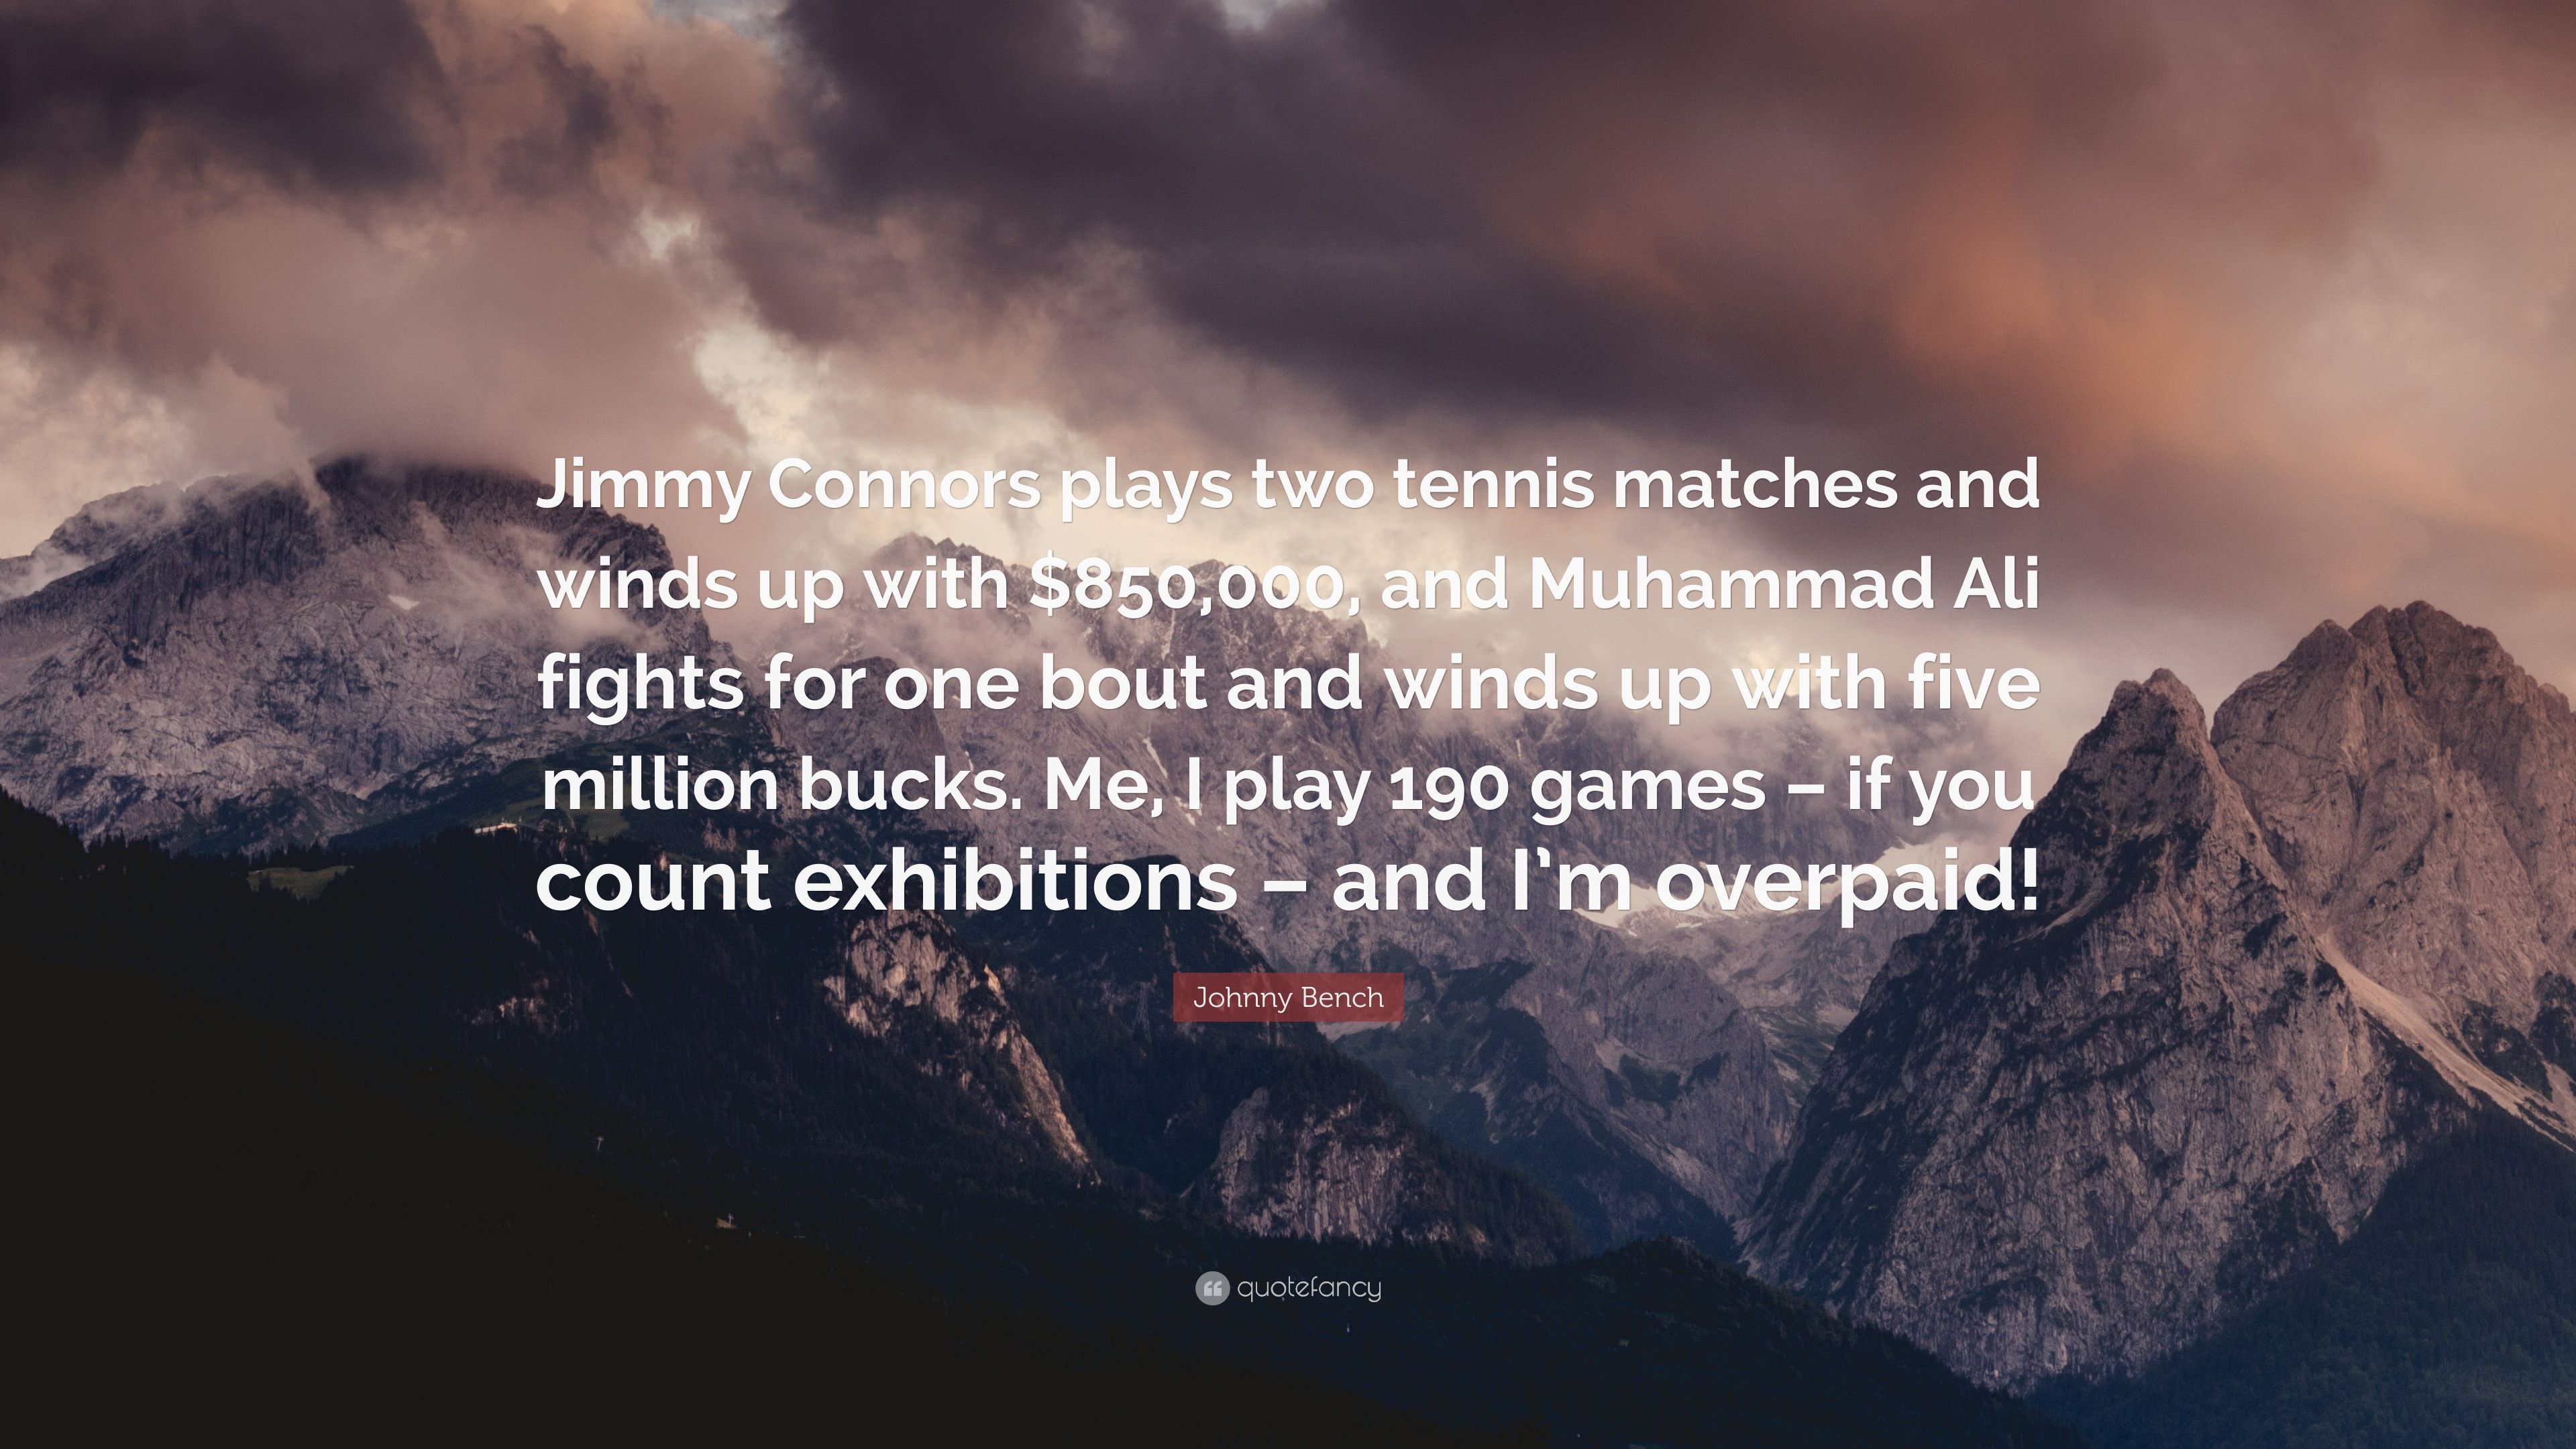 Johnny Bench Quote: “Jimmy Connors plays two tennis matches